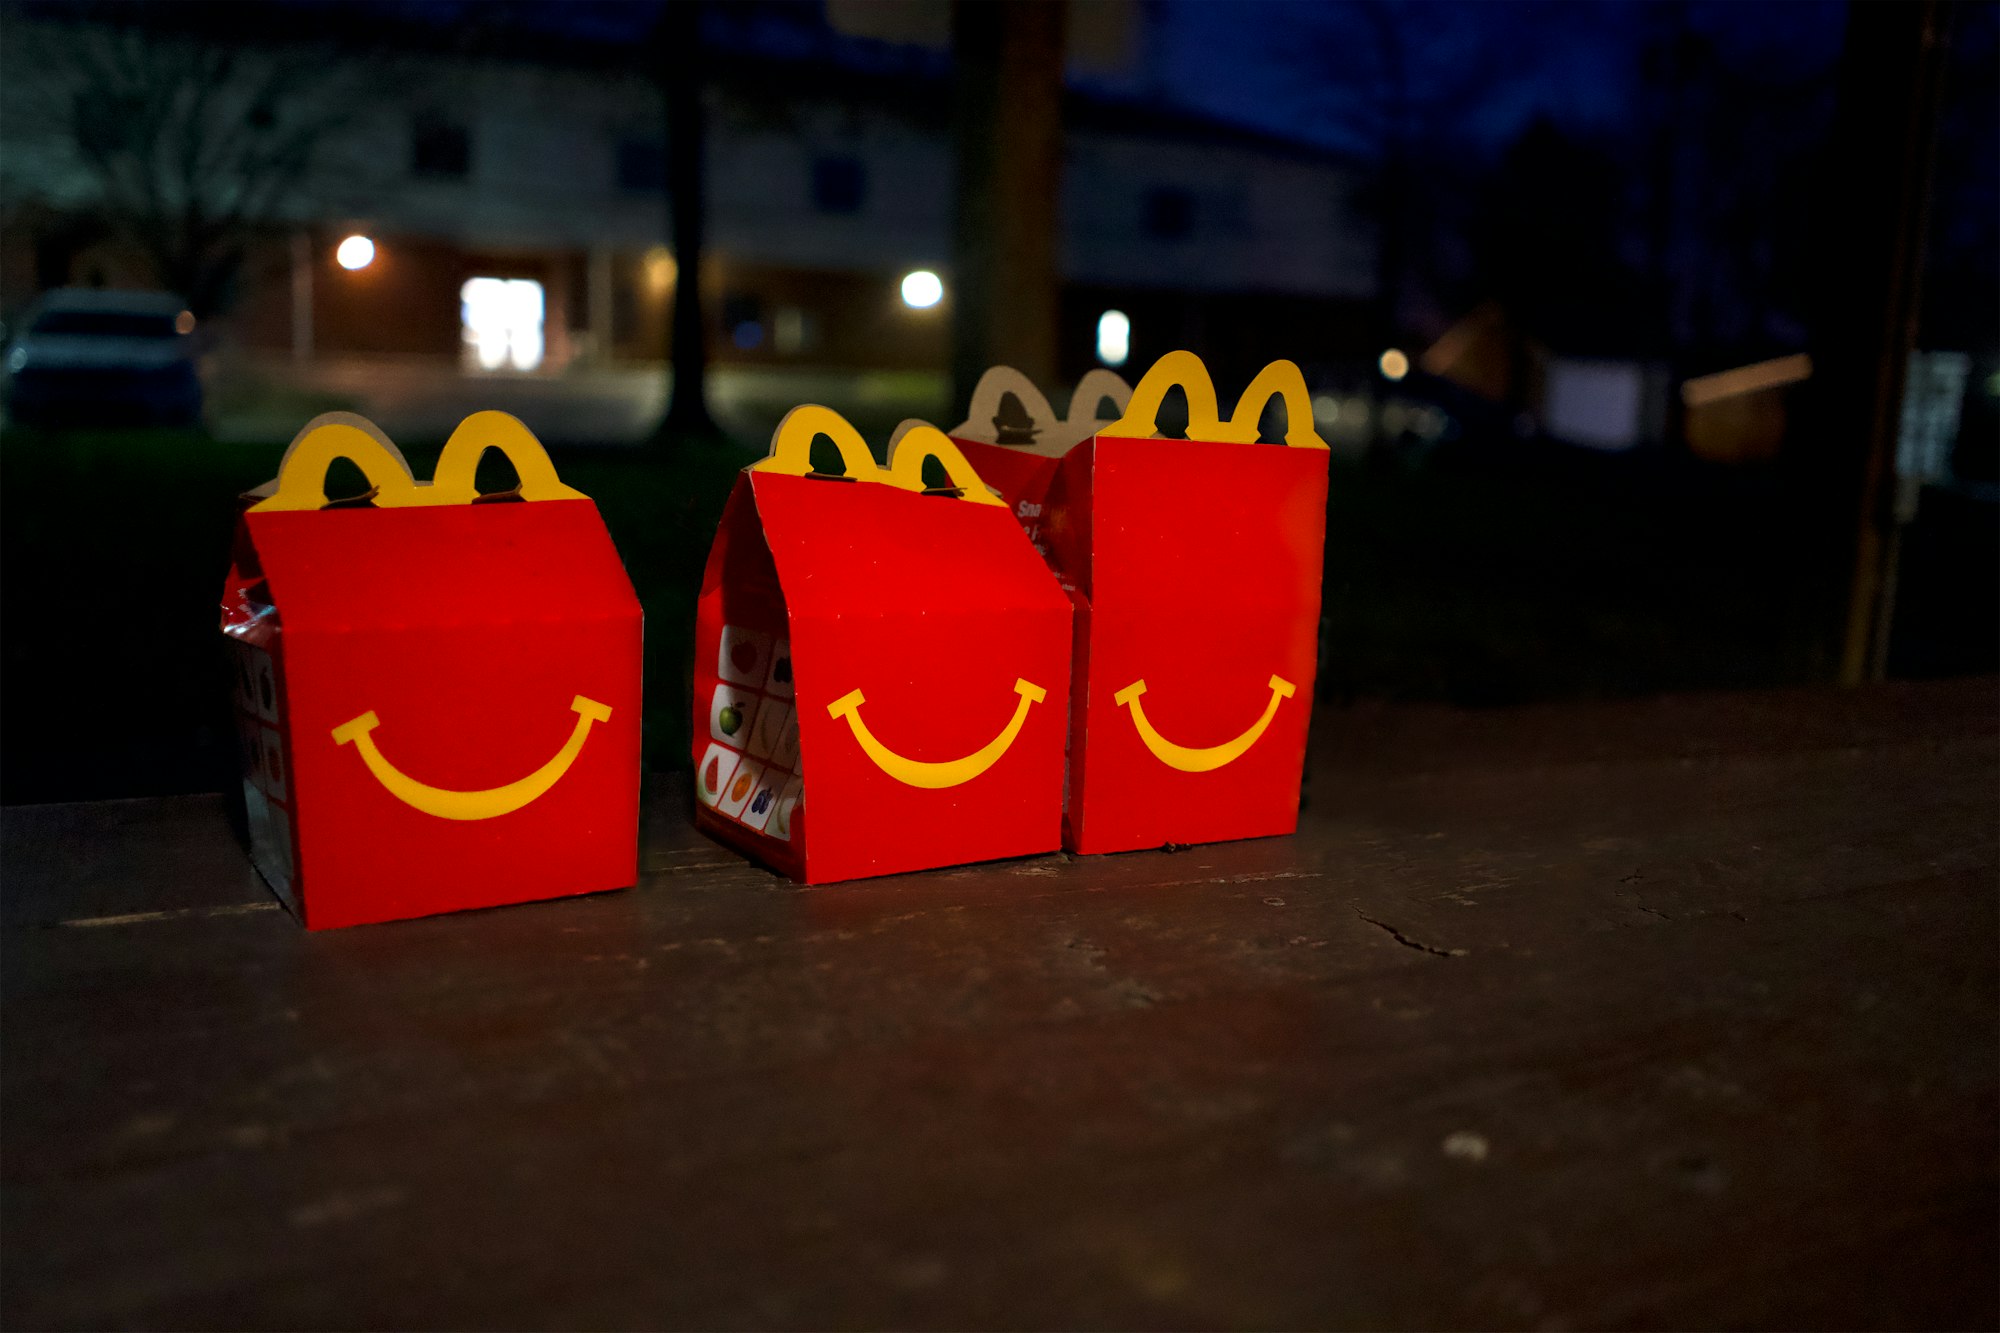 Left behind but still happy meals.